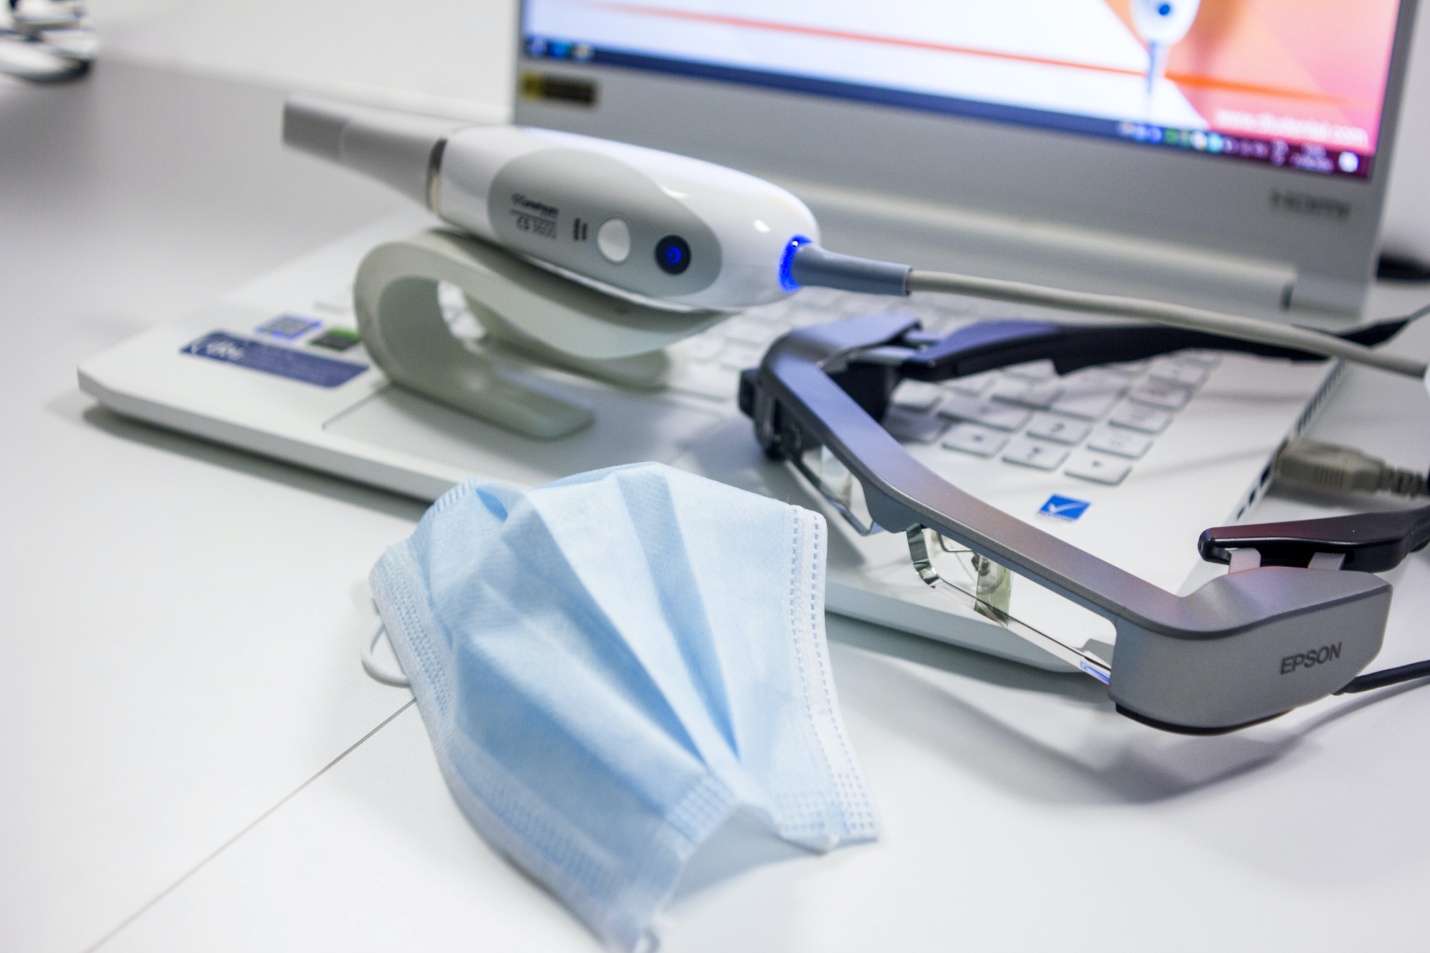 laser dentistry equipment placed on top of the laptop